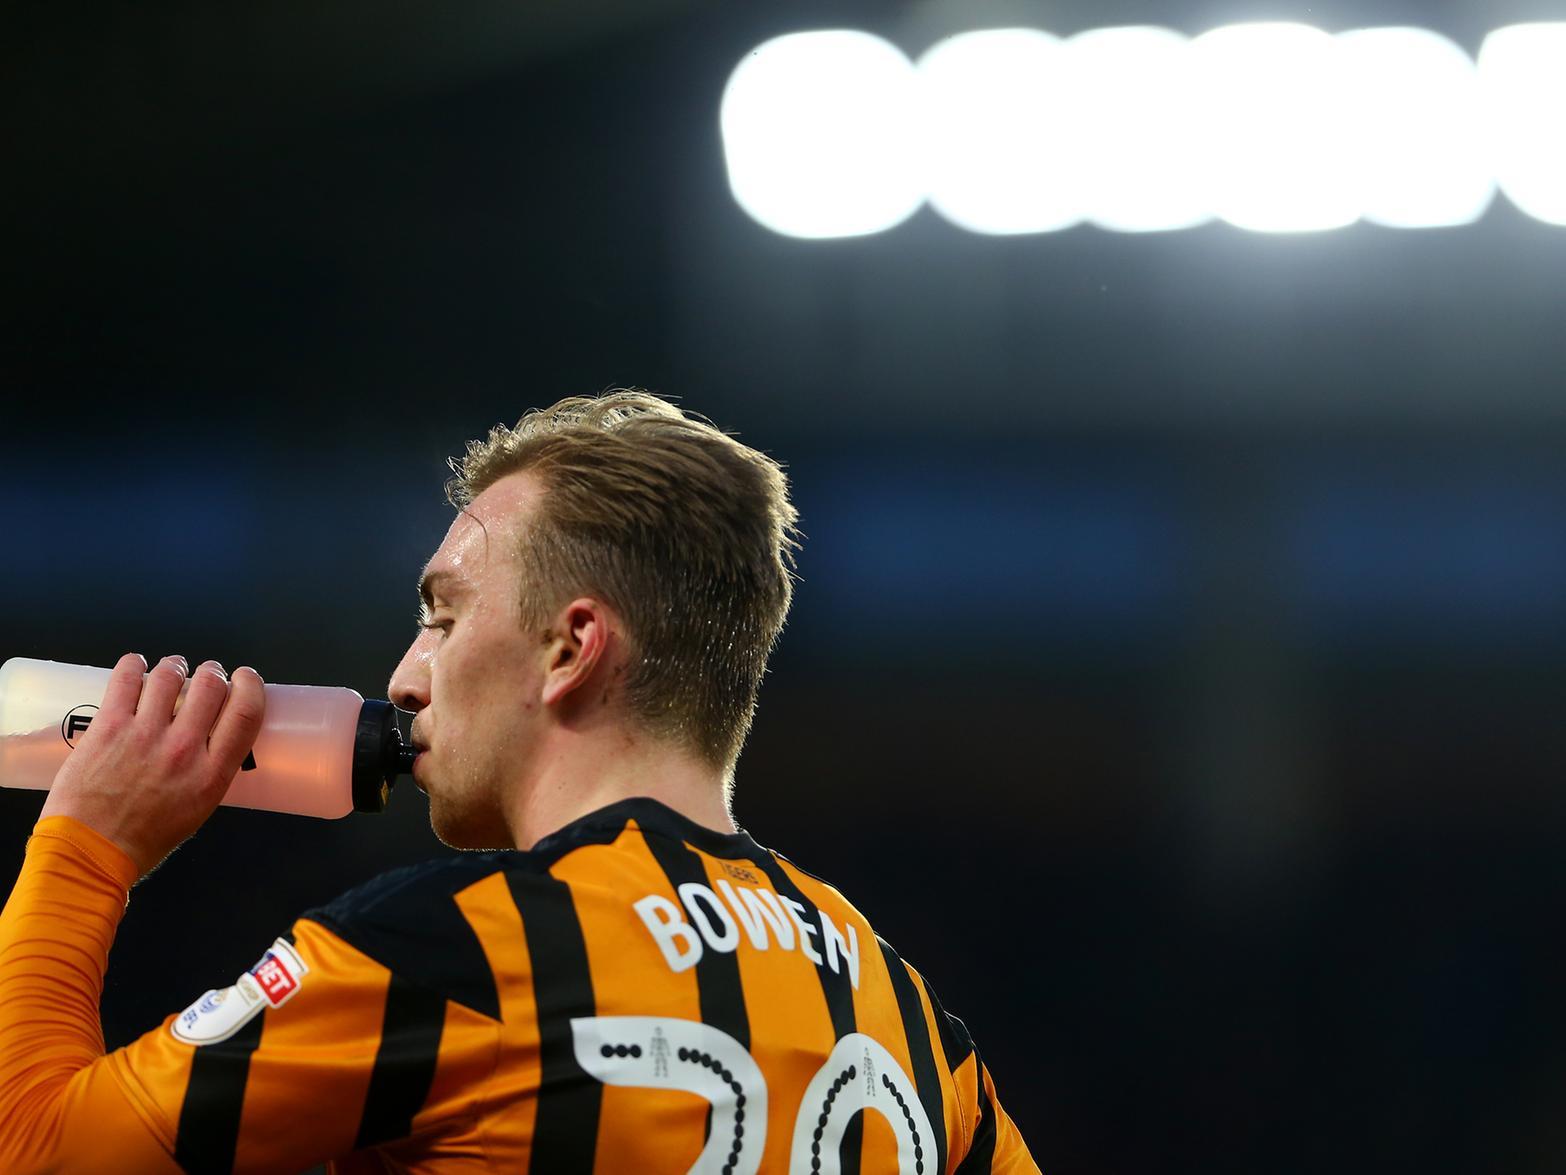 Hull City talisman Jarrod Bowen, previously thought to be a target of Leeds United, has seen his 20m move to West Ham United stall over wage demands - however the club are hopeful that a deal will soon be reached. (Sky Sports)